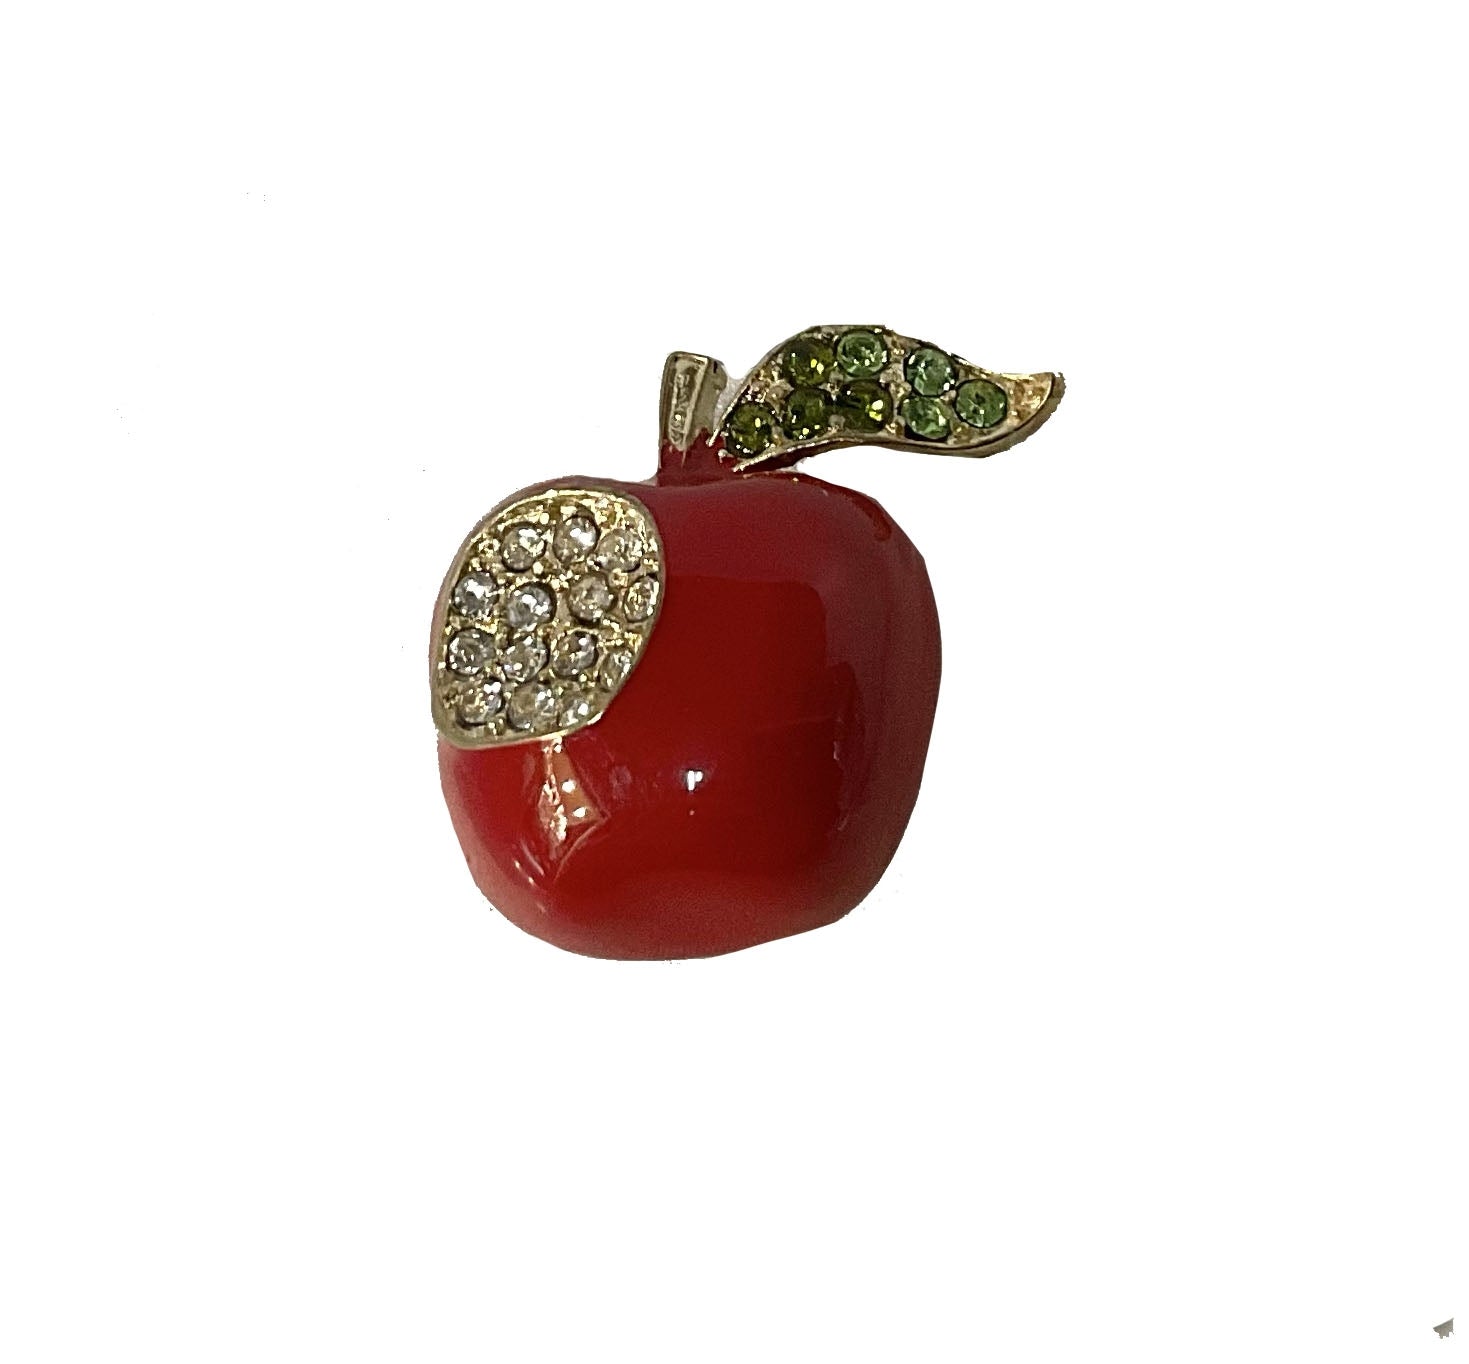 Apple with a Bite Pin#12-30661